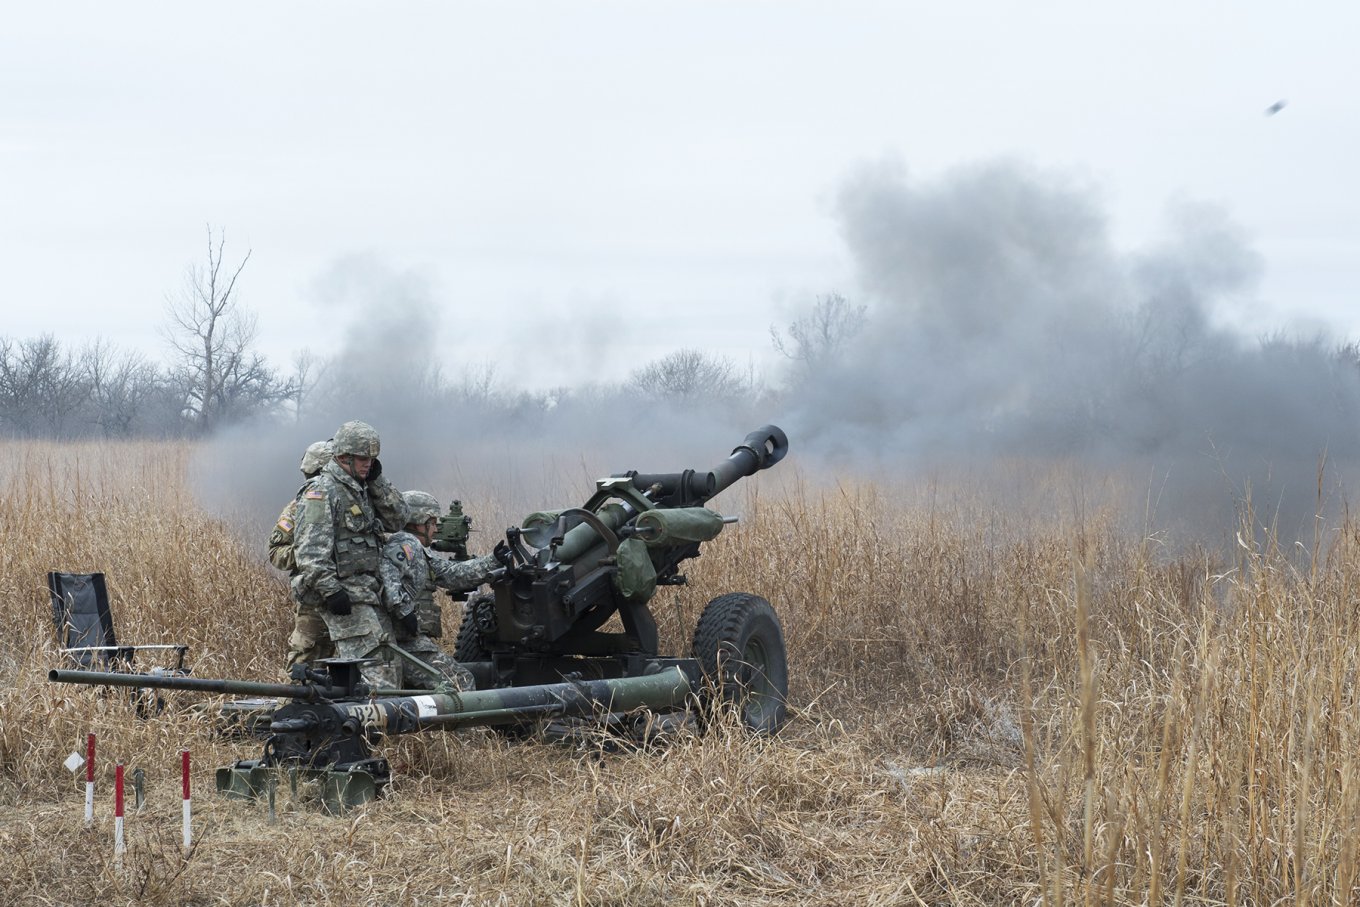 US Sending Ukraine Another $400M in New Security Aid Providing anti-UAV Machine Guns, Ammunition for HIMARS, NASAMS and More, The M119 105 mm howitzer, Defense Express